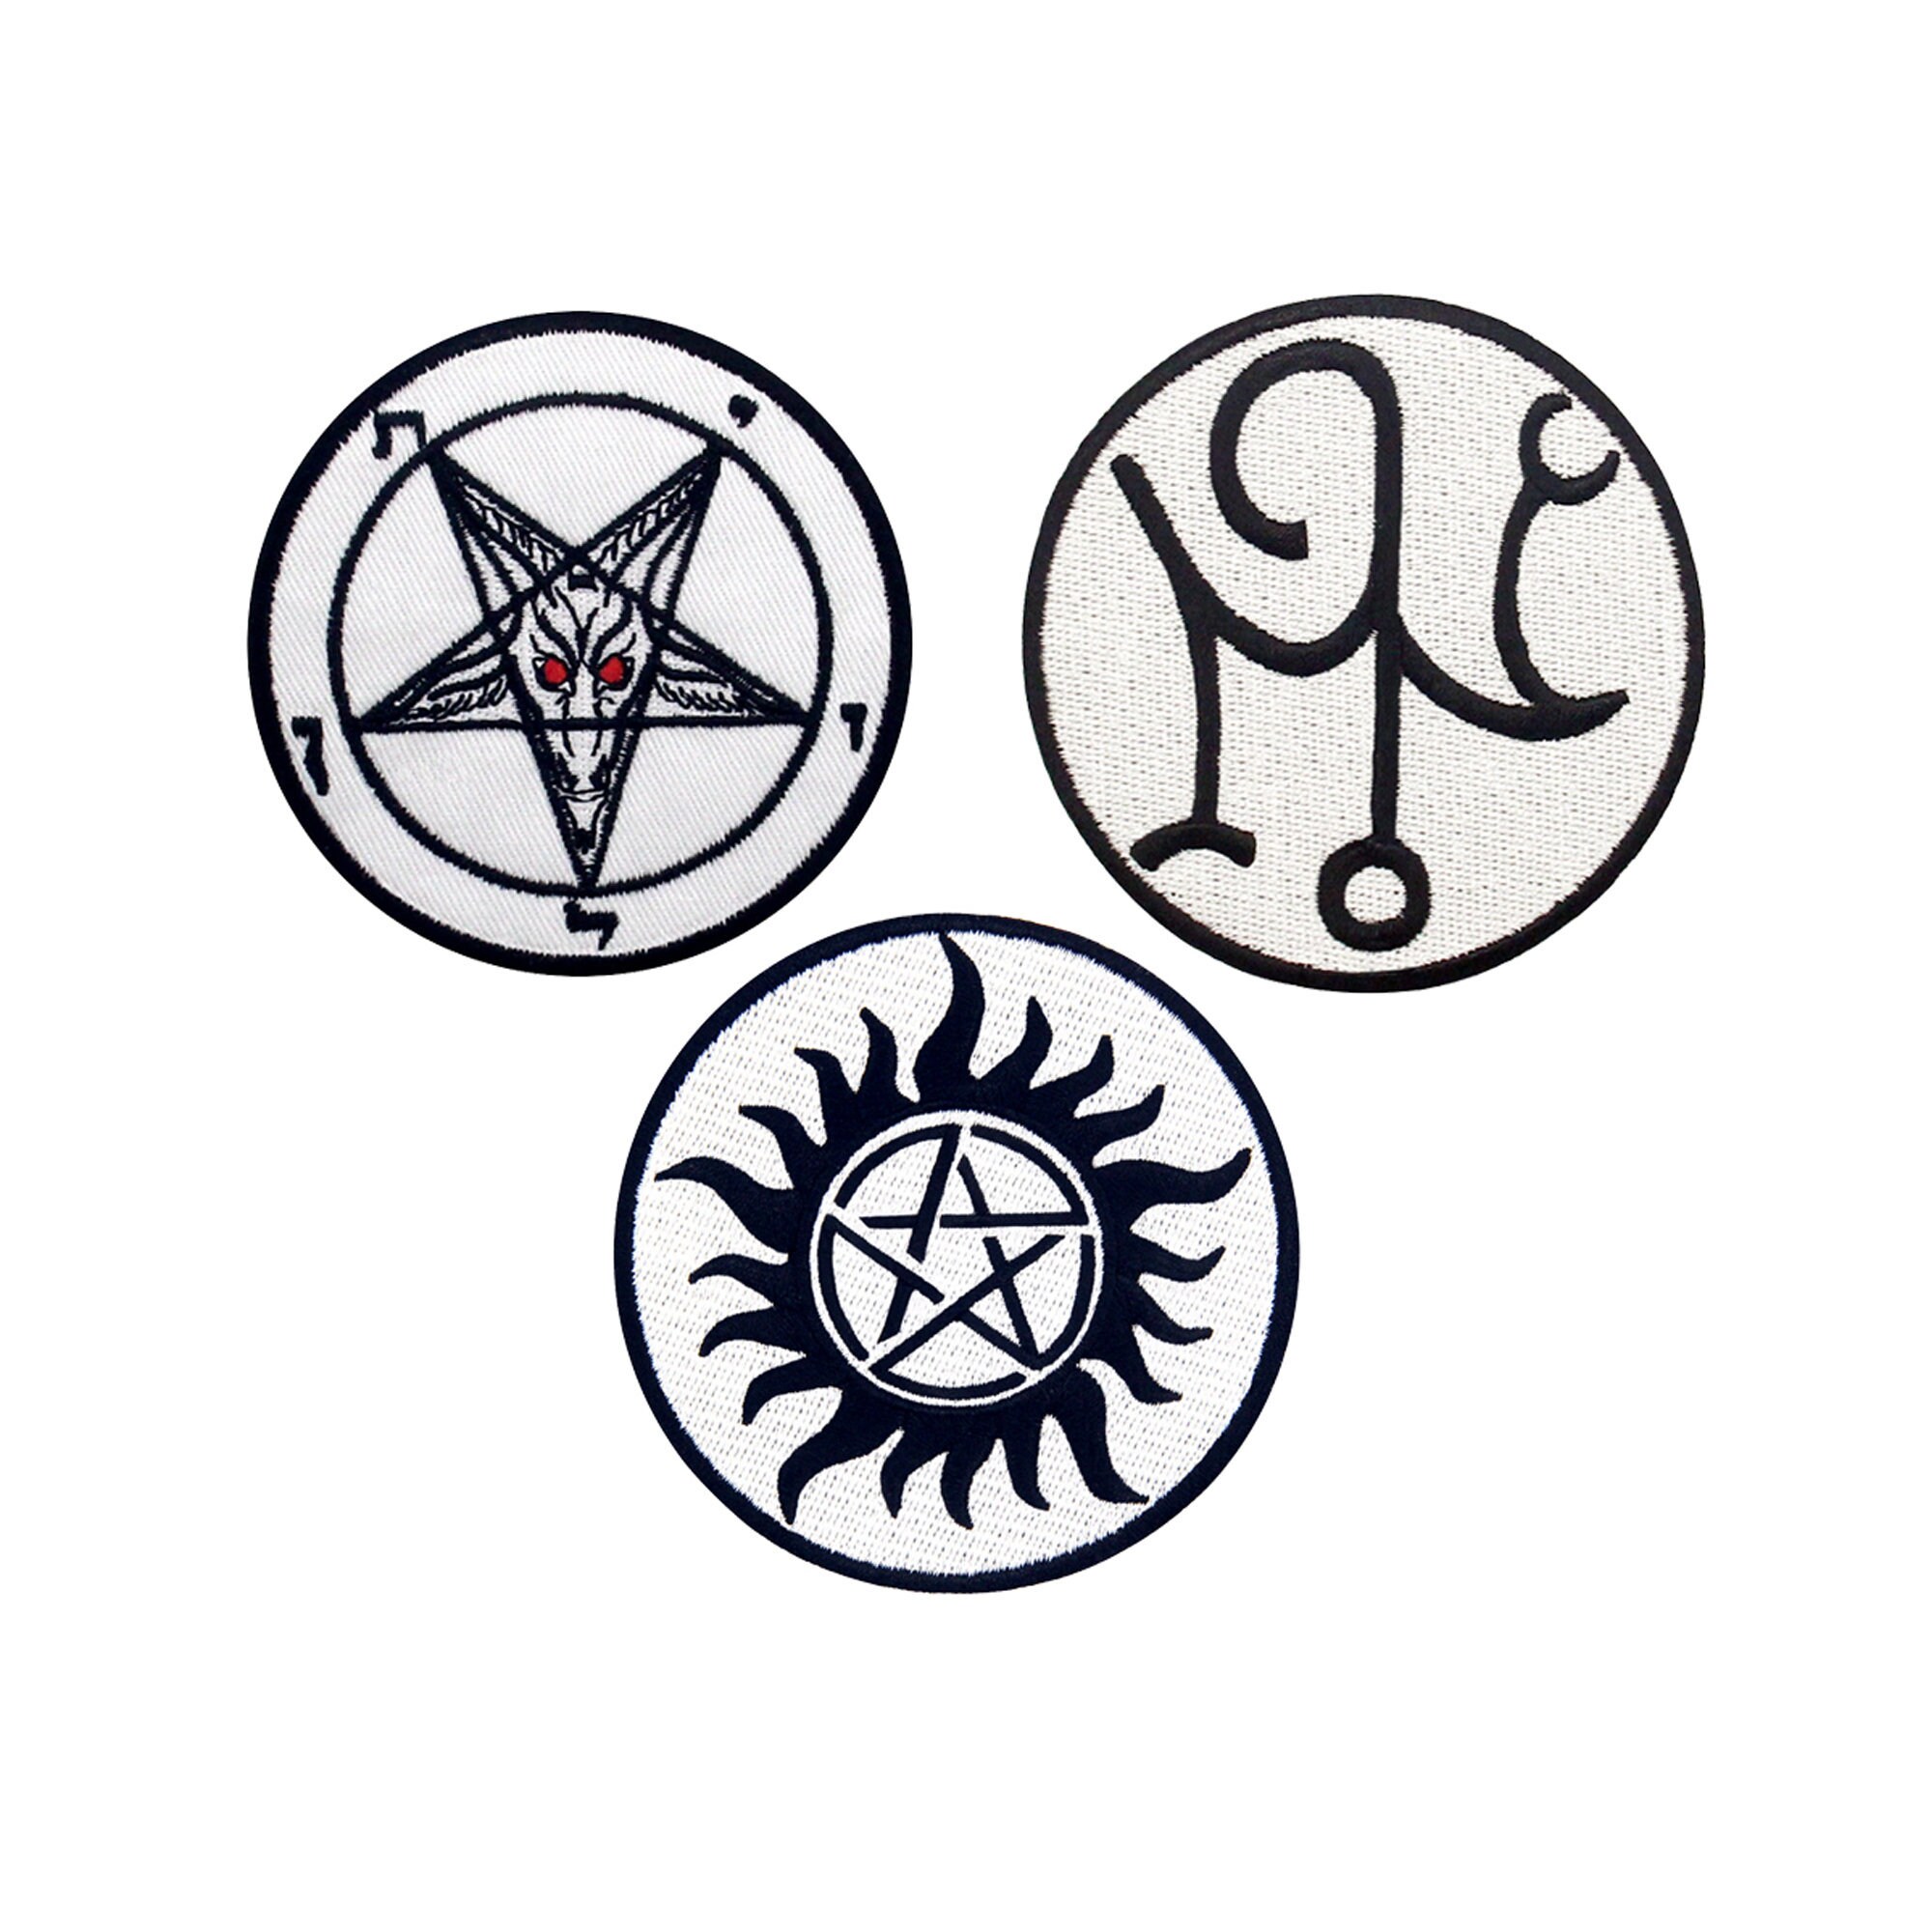 symbols of protection against demons